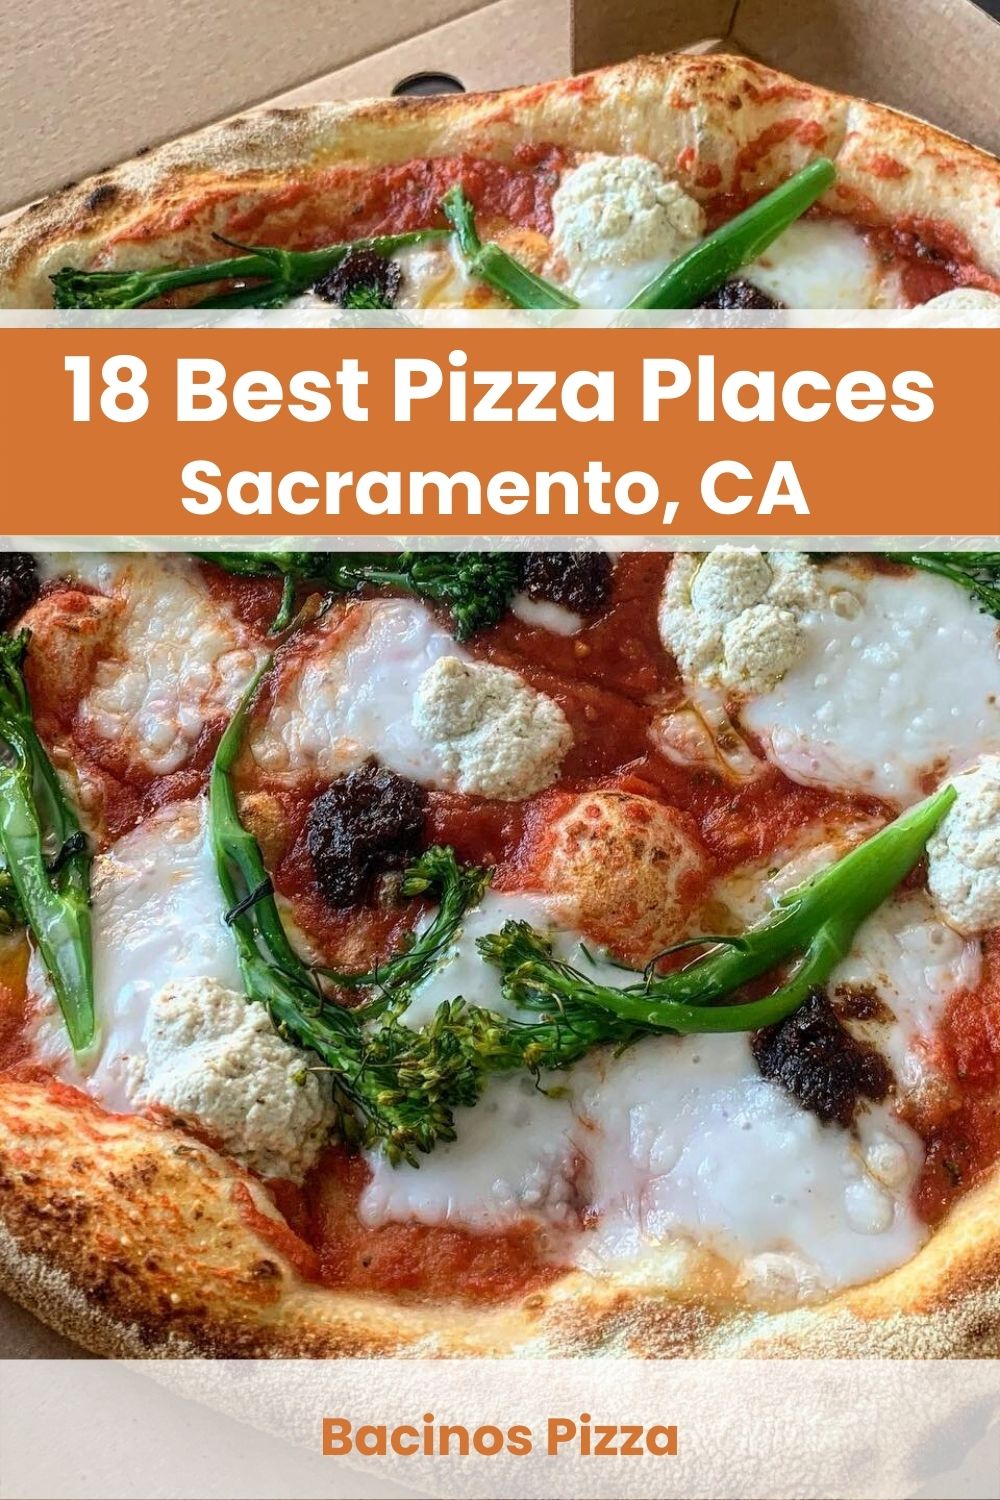 Best Pizza Places in Sacramento